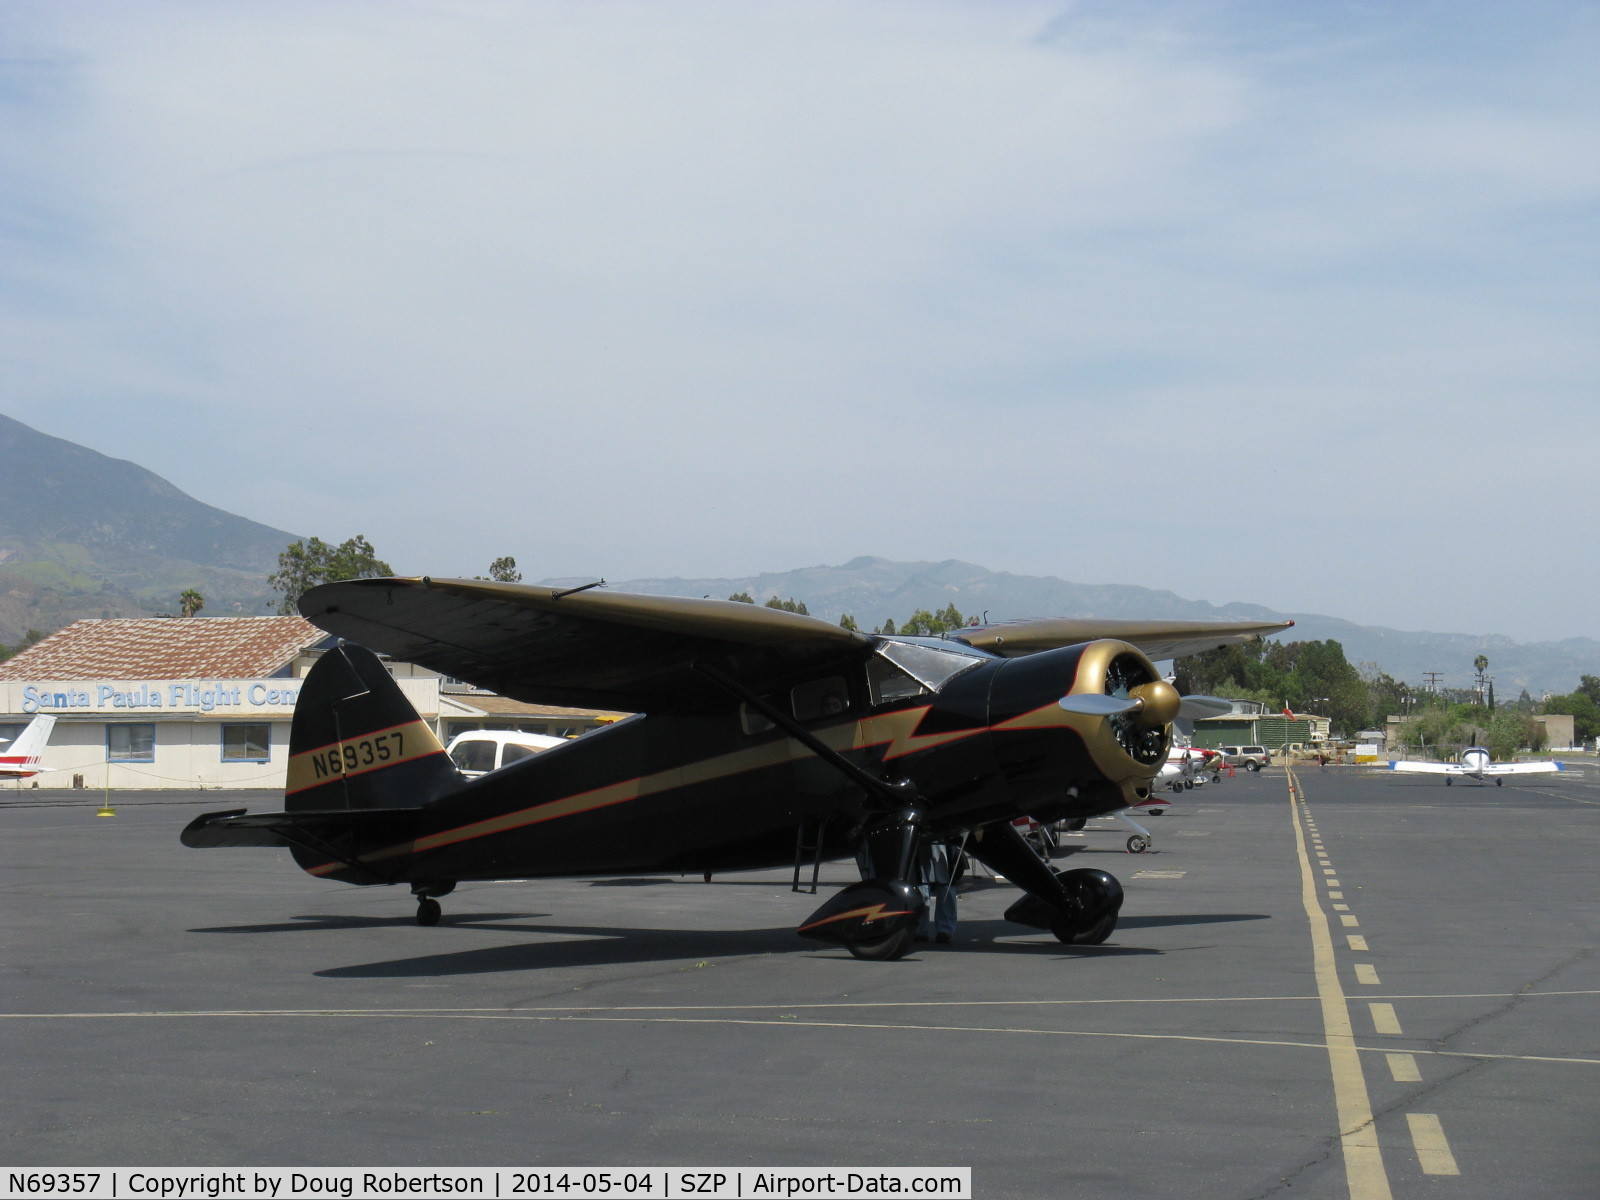 N69357, 1944 Stinson V77 Reliant C/N 77-448, 1944 Stinson V-77 by Vultee Aviation, Lycoming R-680-13 per engine data plate, 9 cylinder 300 Hp radial, loading